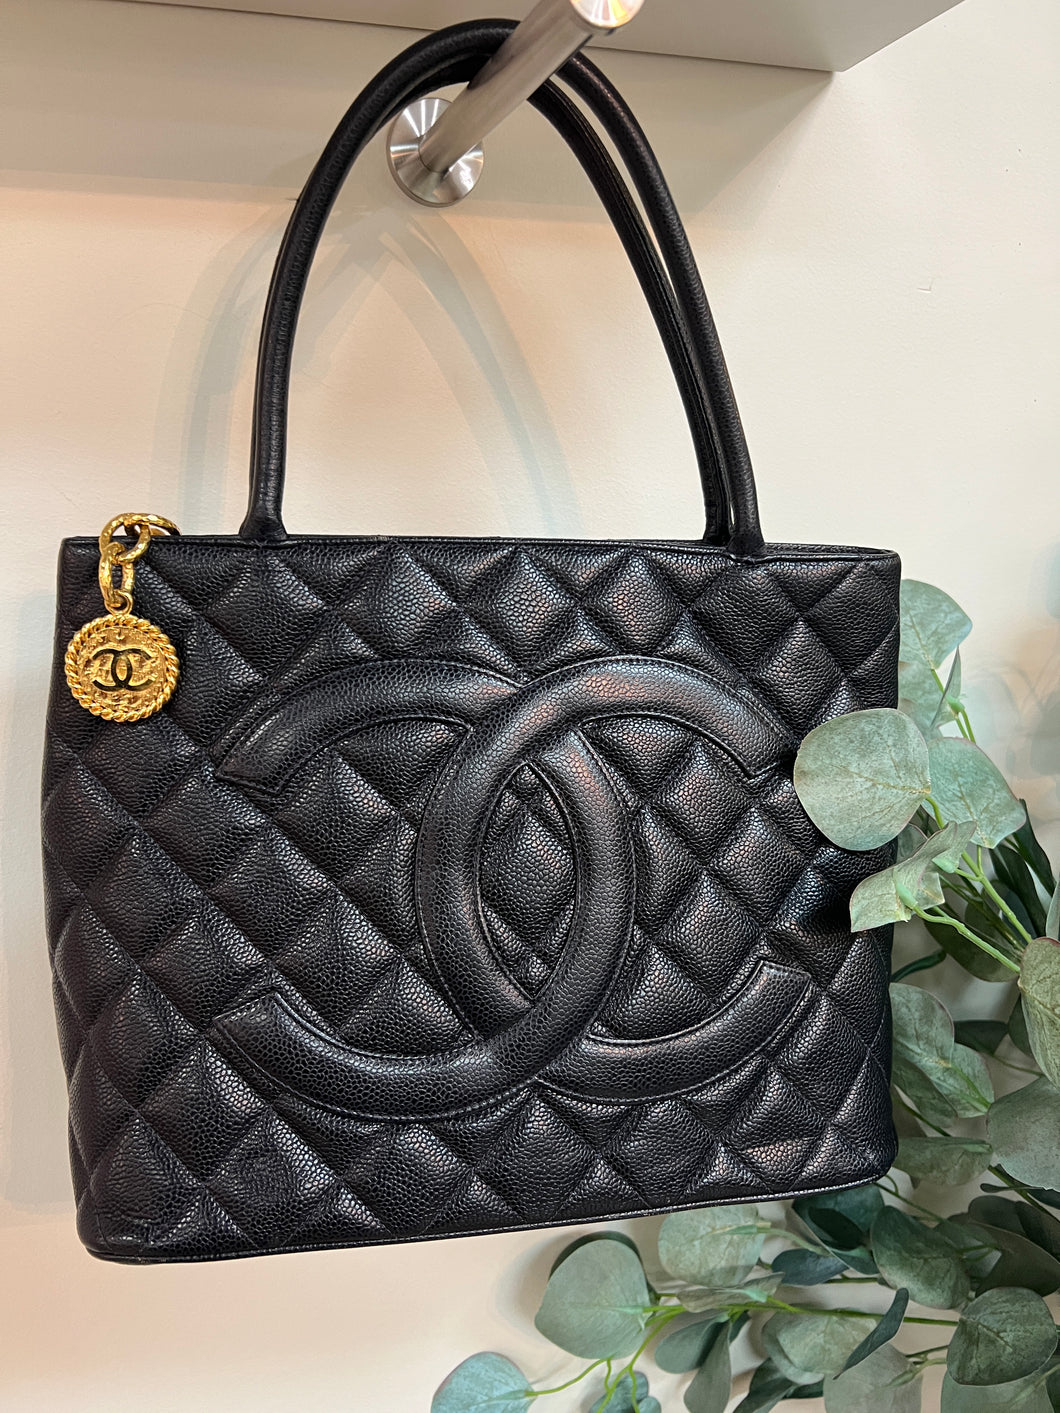 CHANEL, Bags, Soldauthentic Chanel Medallion Tote Bag Black